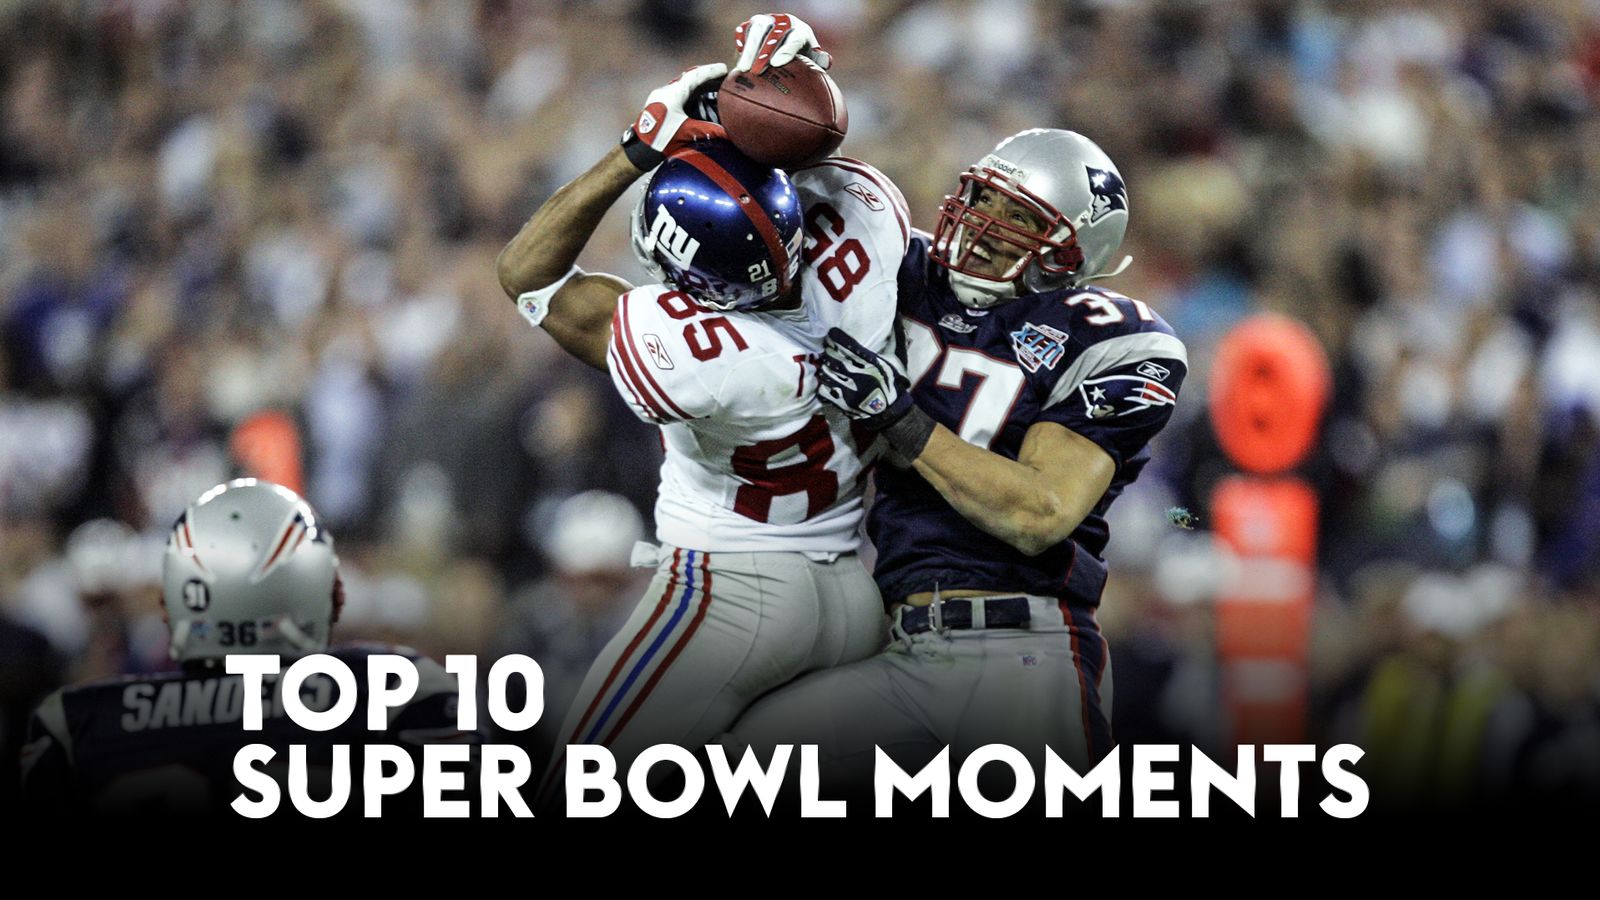 7. John Elway – The worst defeat in Super Bowl history